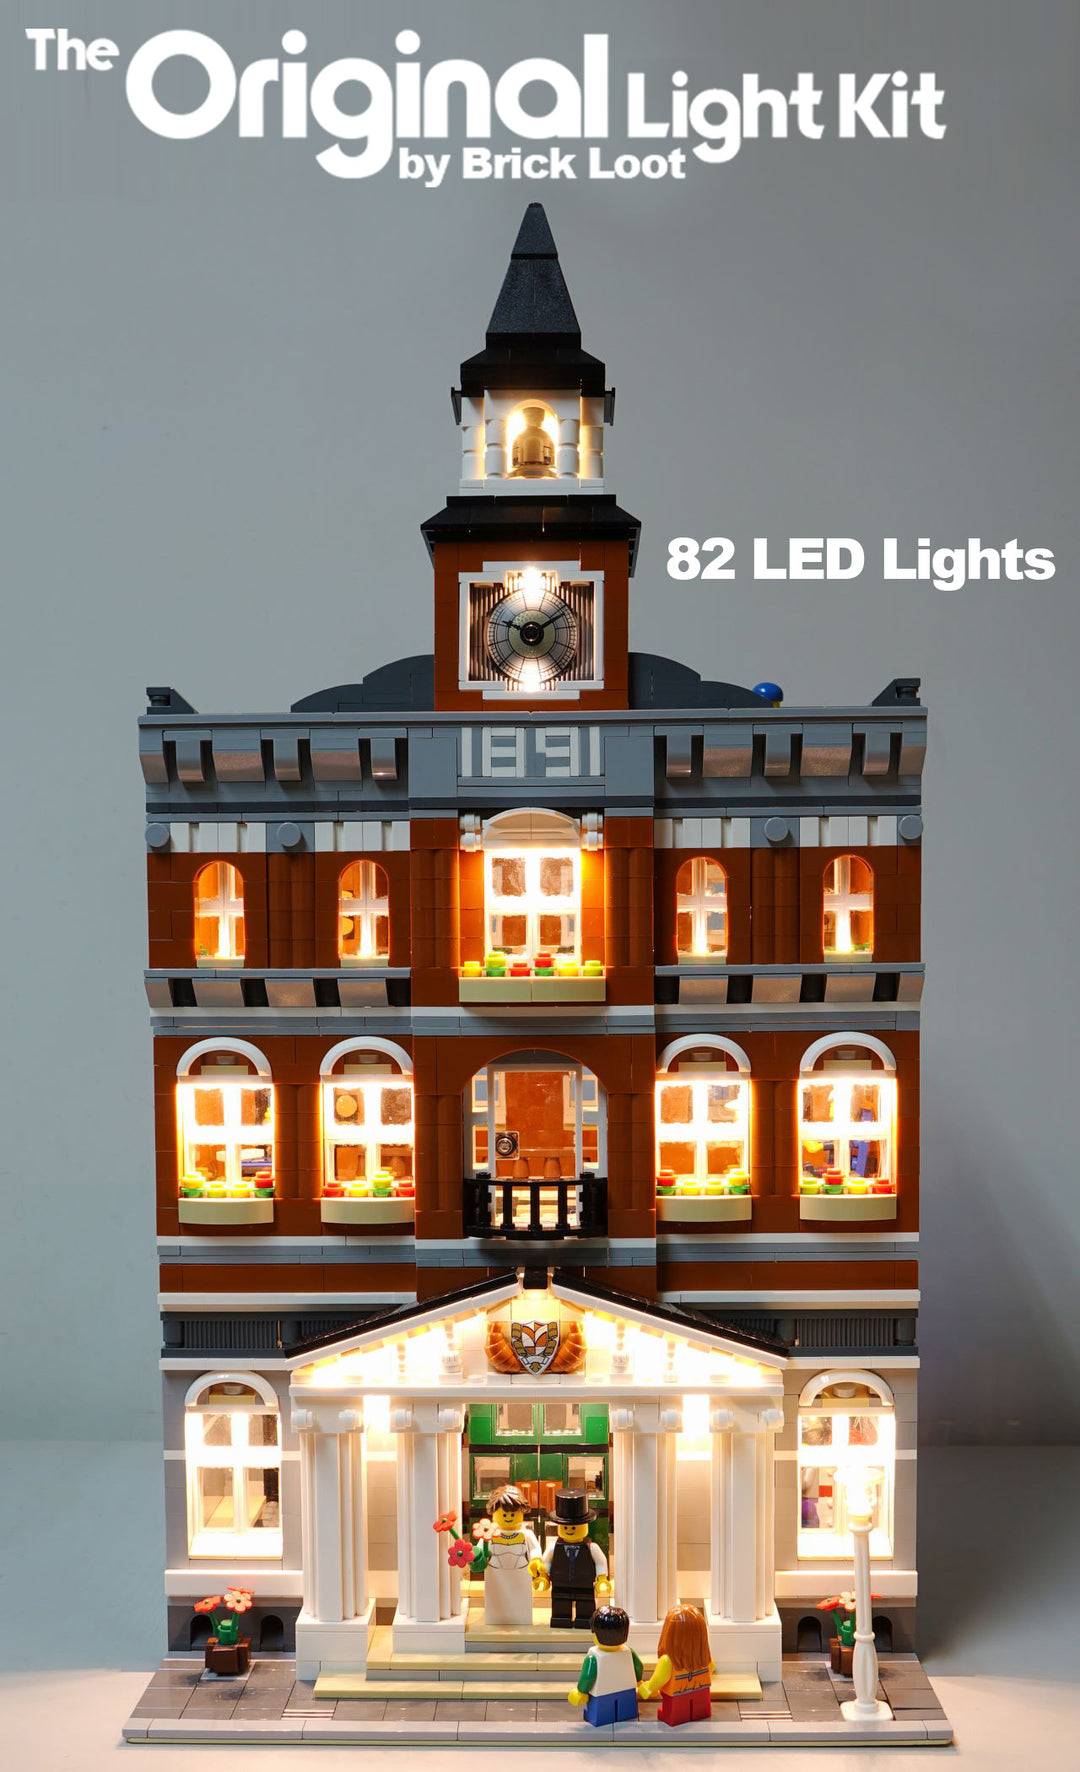 BRIKSMAX LED Lighting Kit for Architecture Las Vegas-Compatible with Lego 21047 Building Blocks Model- Not Include The Lego Set